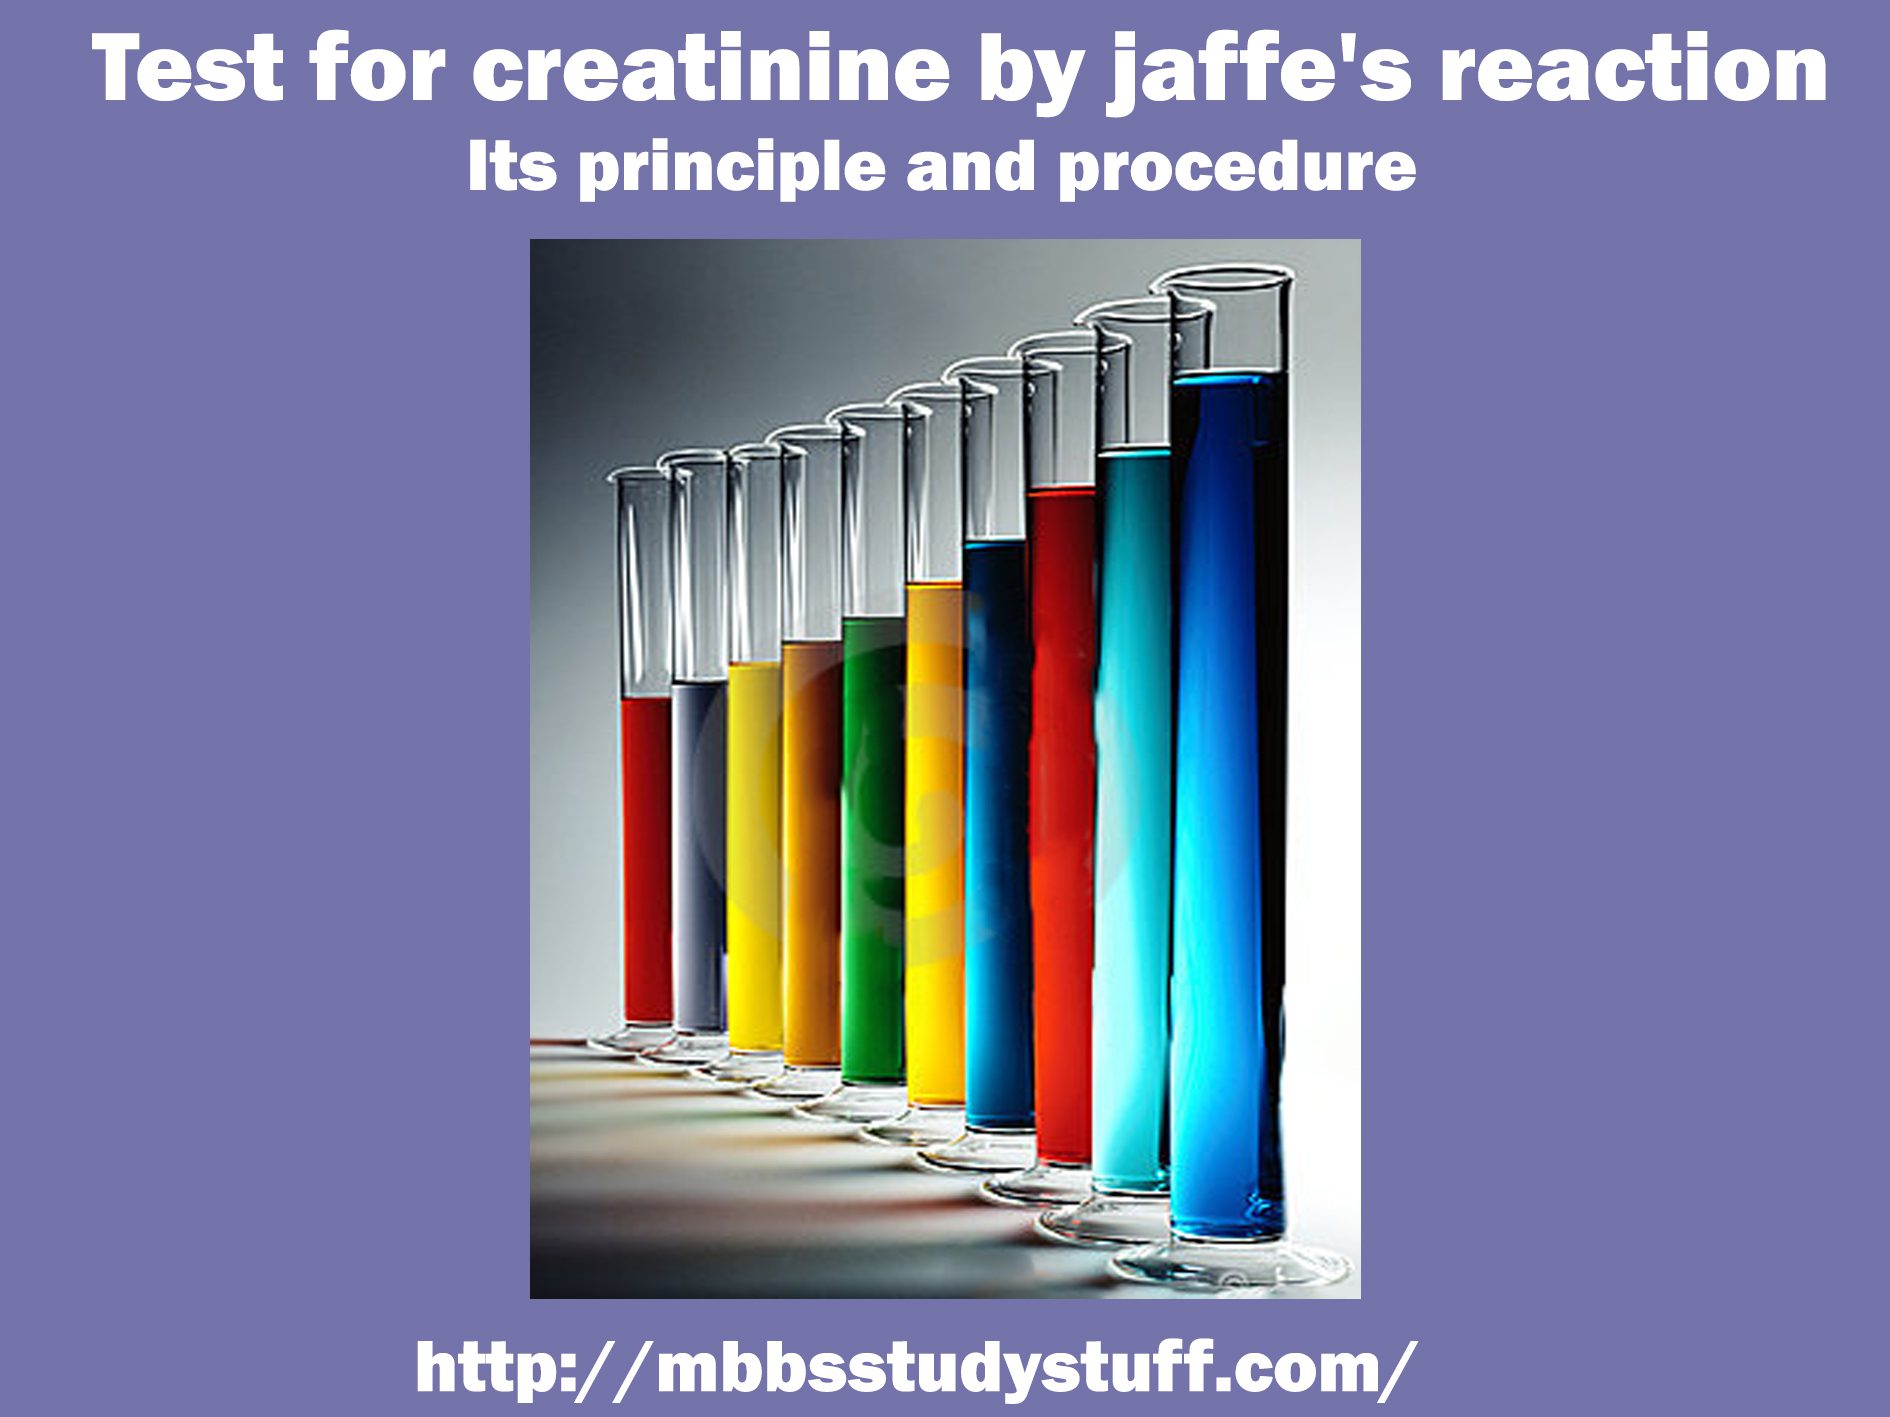 Test for creatinine by jaffe's reaction - Its principle and procedure